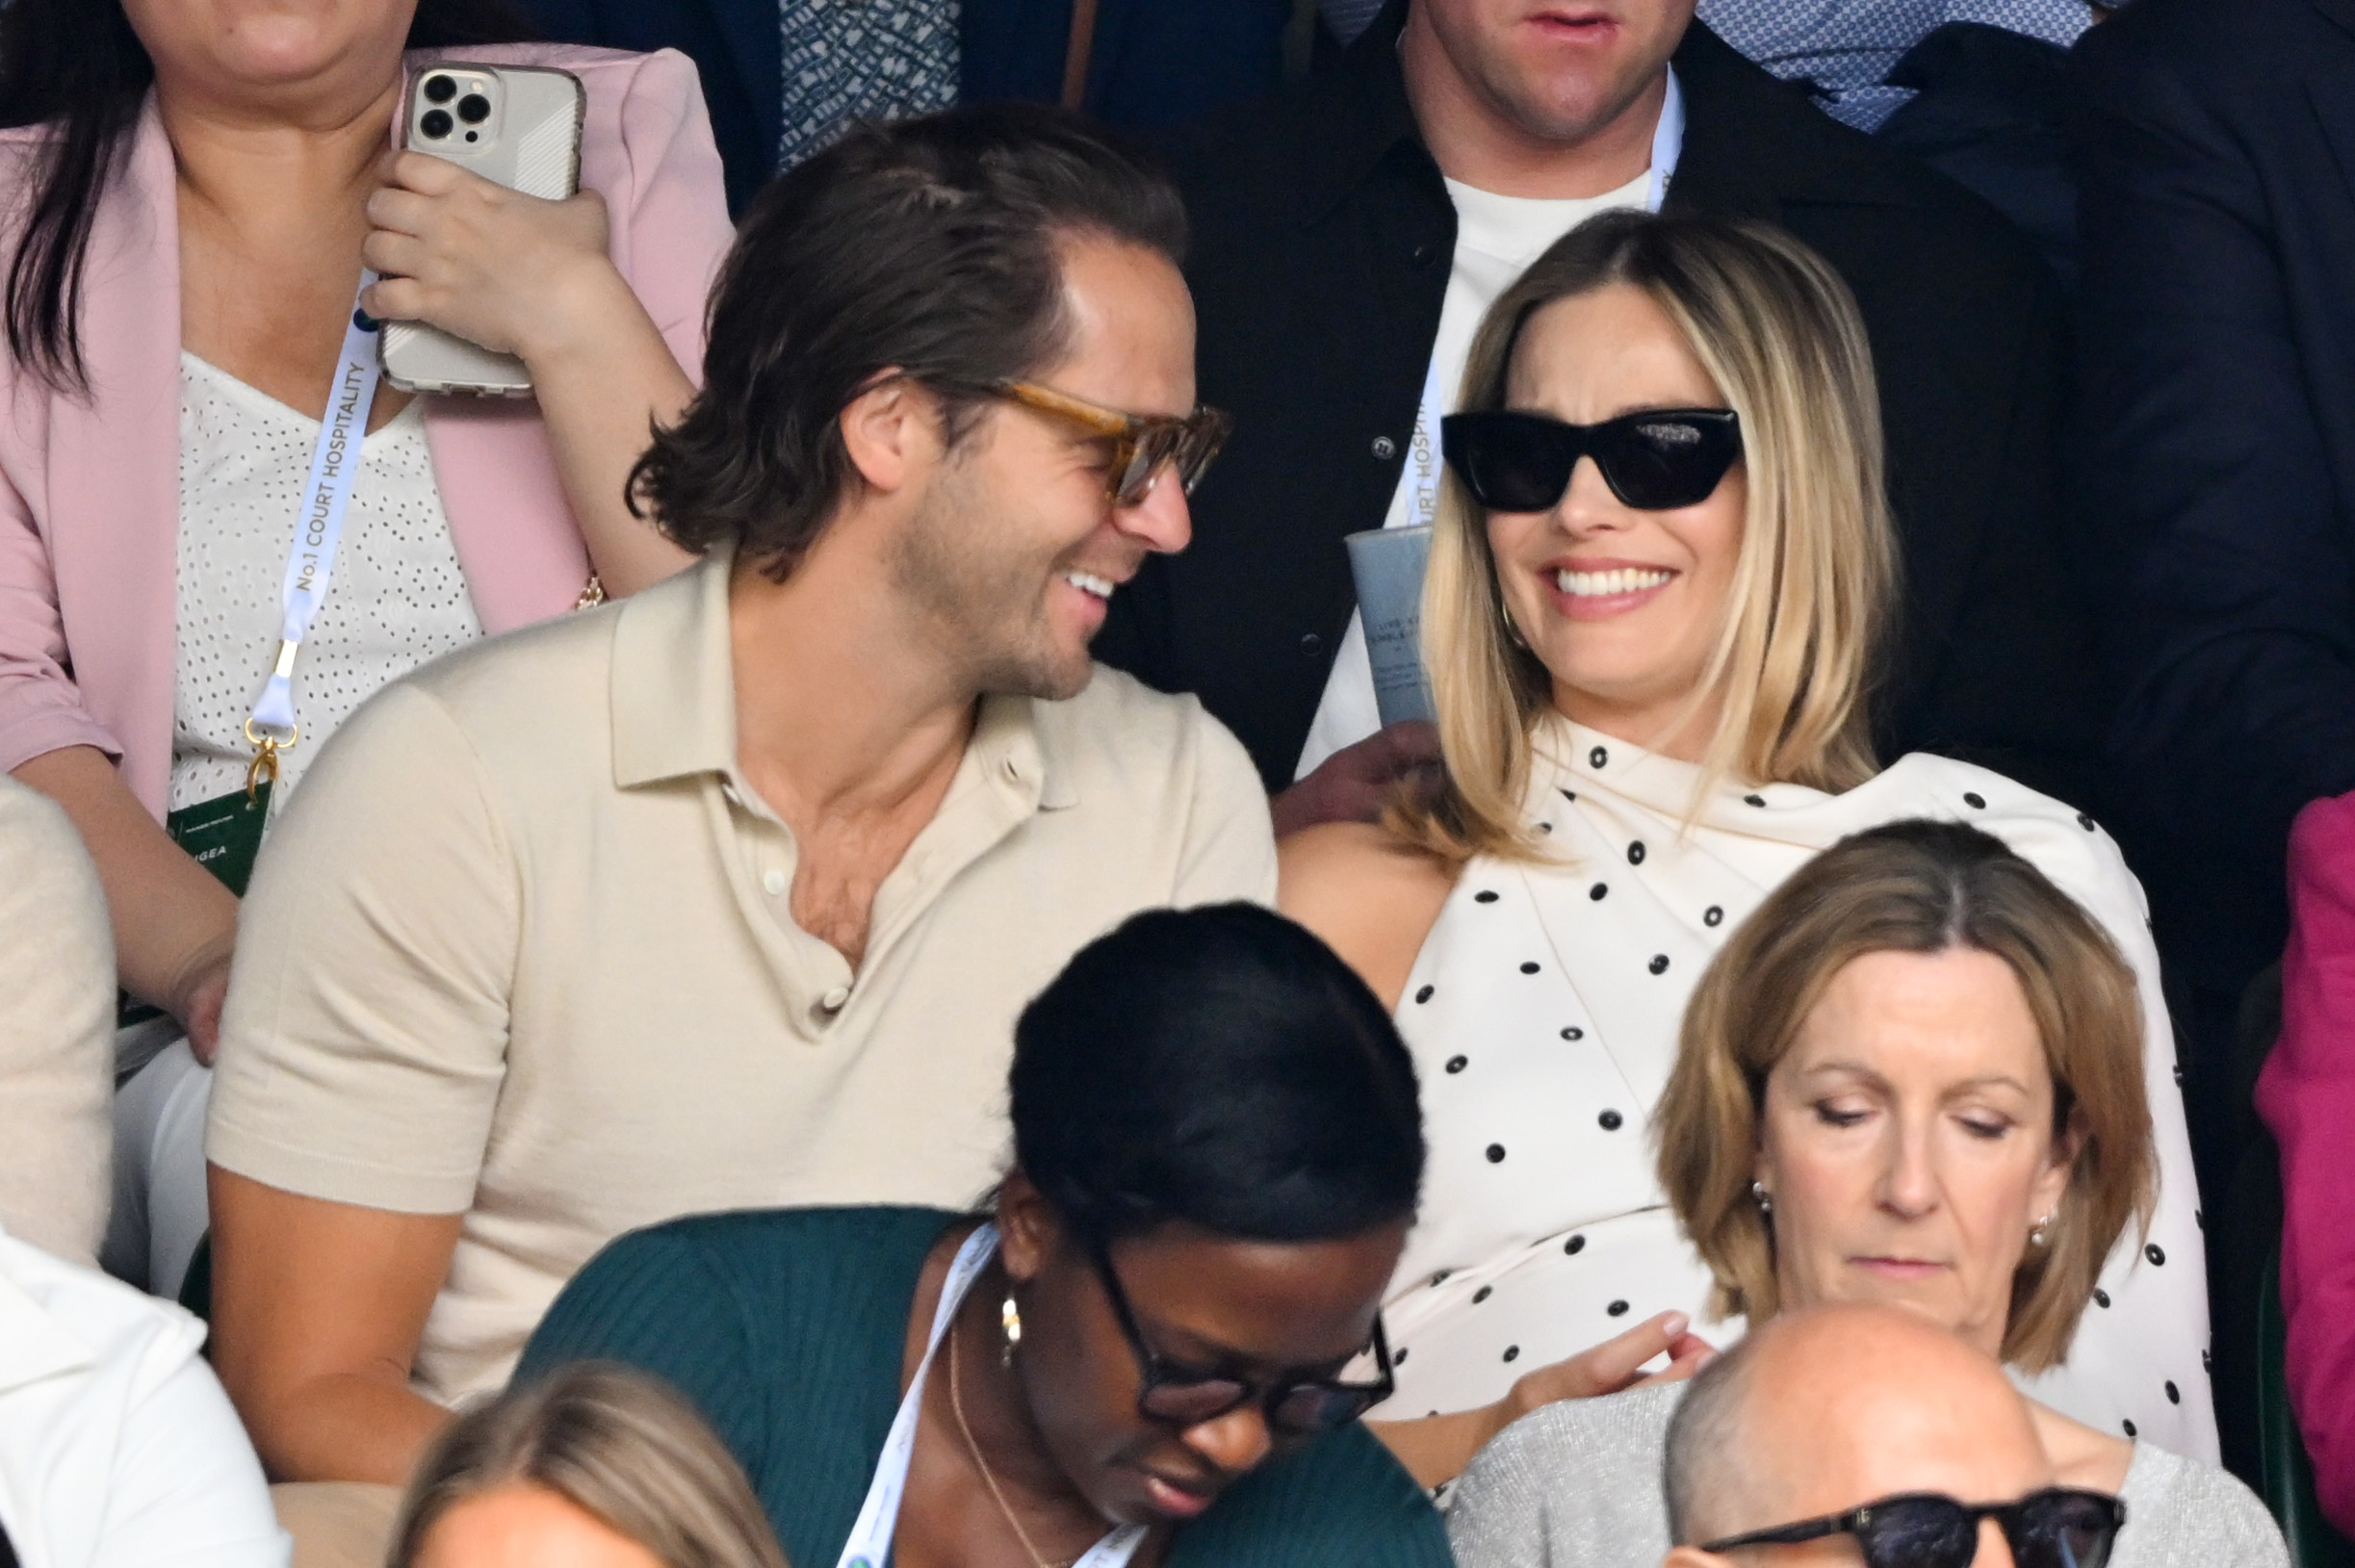 Margot and Tom were all smiles as they watched the match